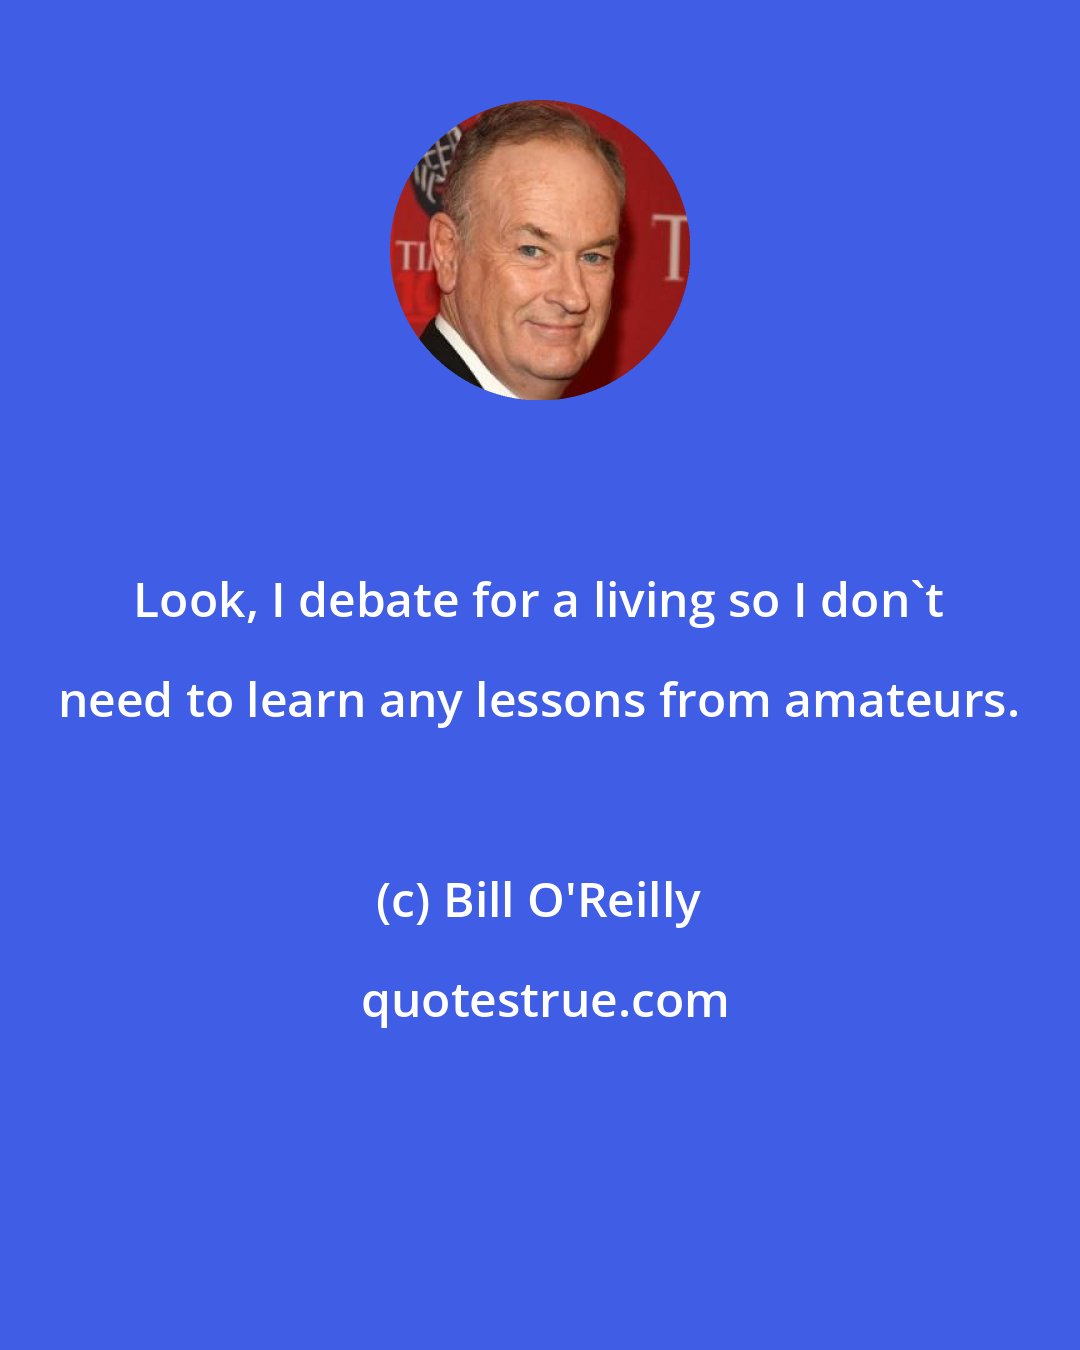 Bill O'Reilly: Look, I debate for a living so I don't need to learn any lessons from amateurs.